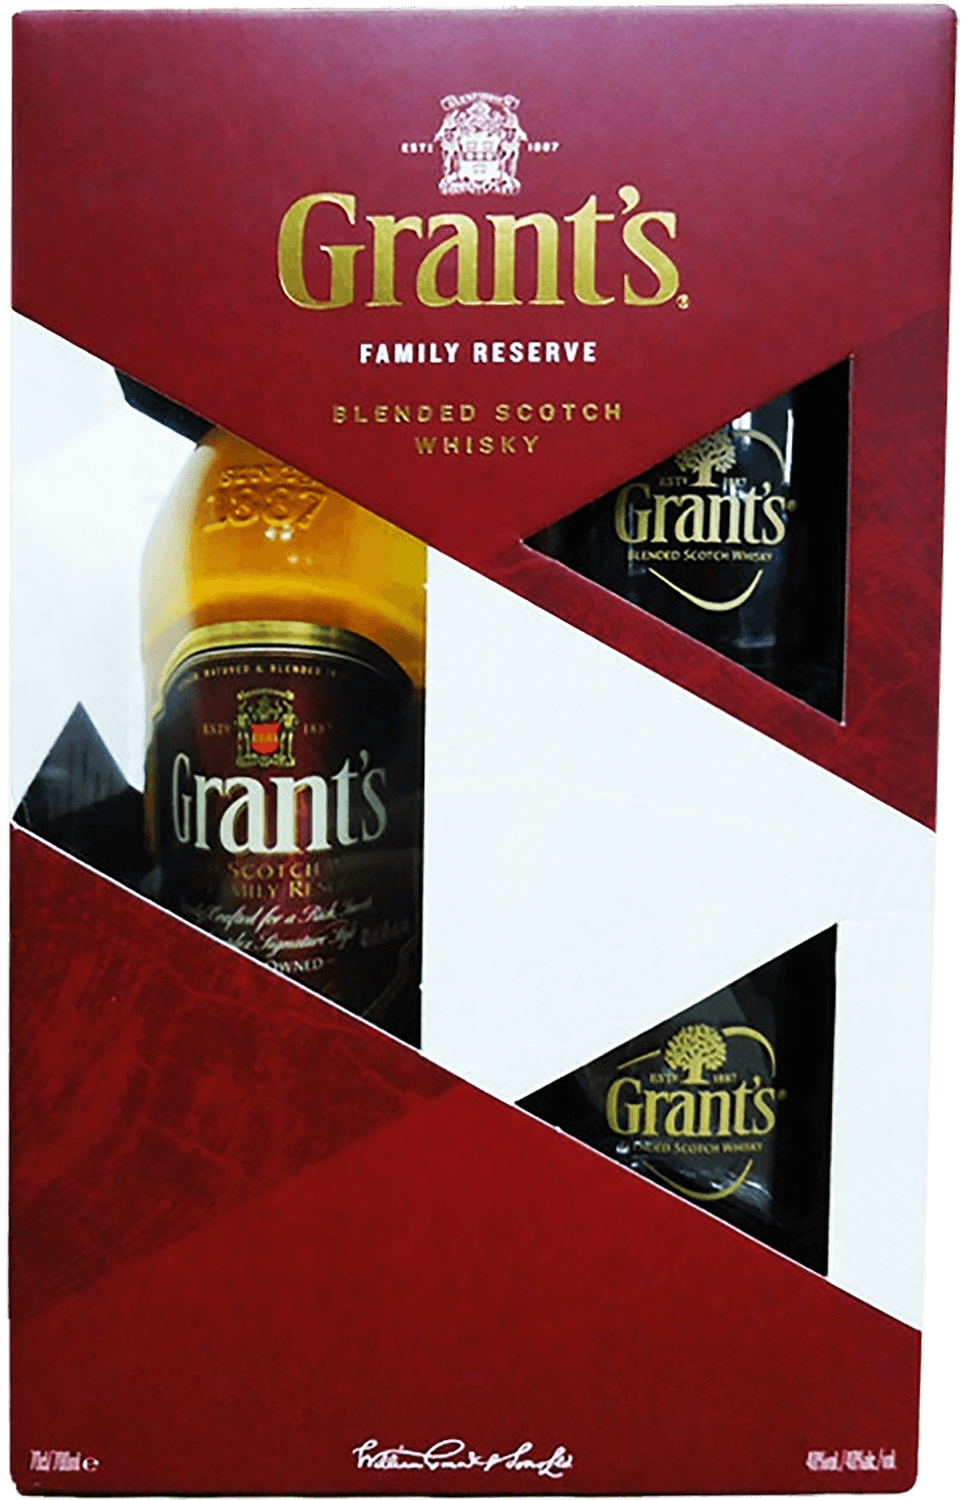 Grant's Family Reserve Blended Scotch Whisky (gift box with 2 glasses) dewar s special reserve 12 y o blended scotch whiskey gift box